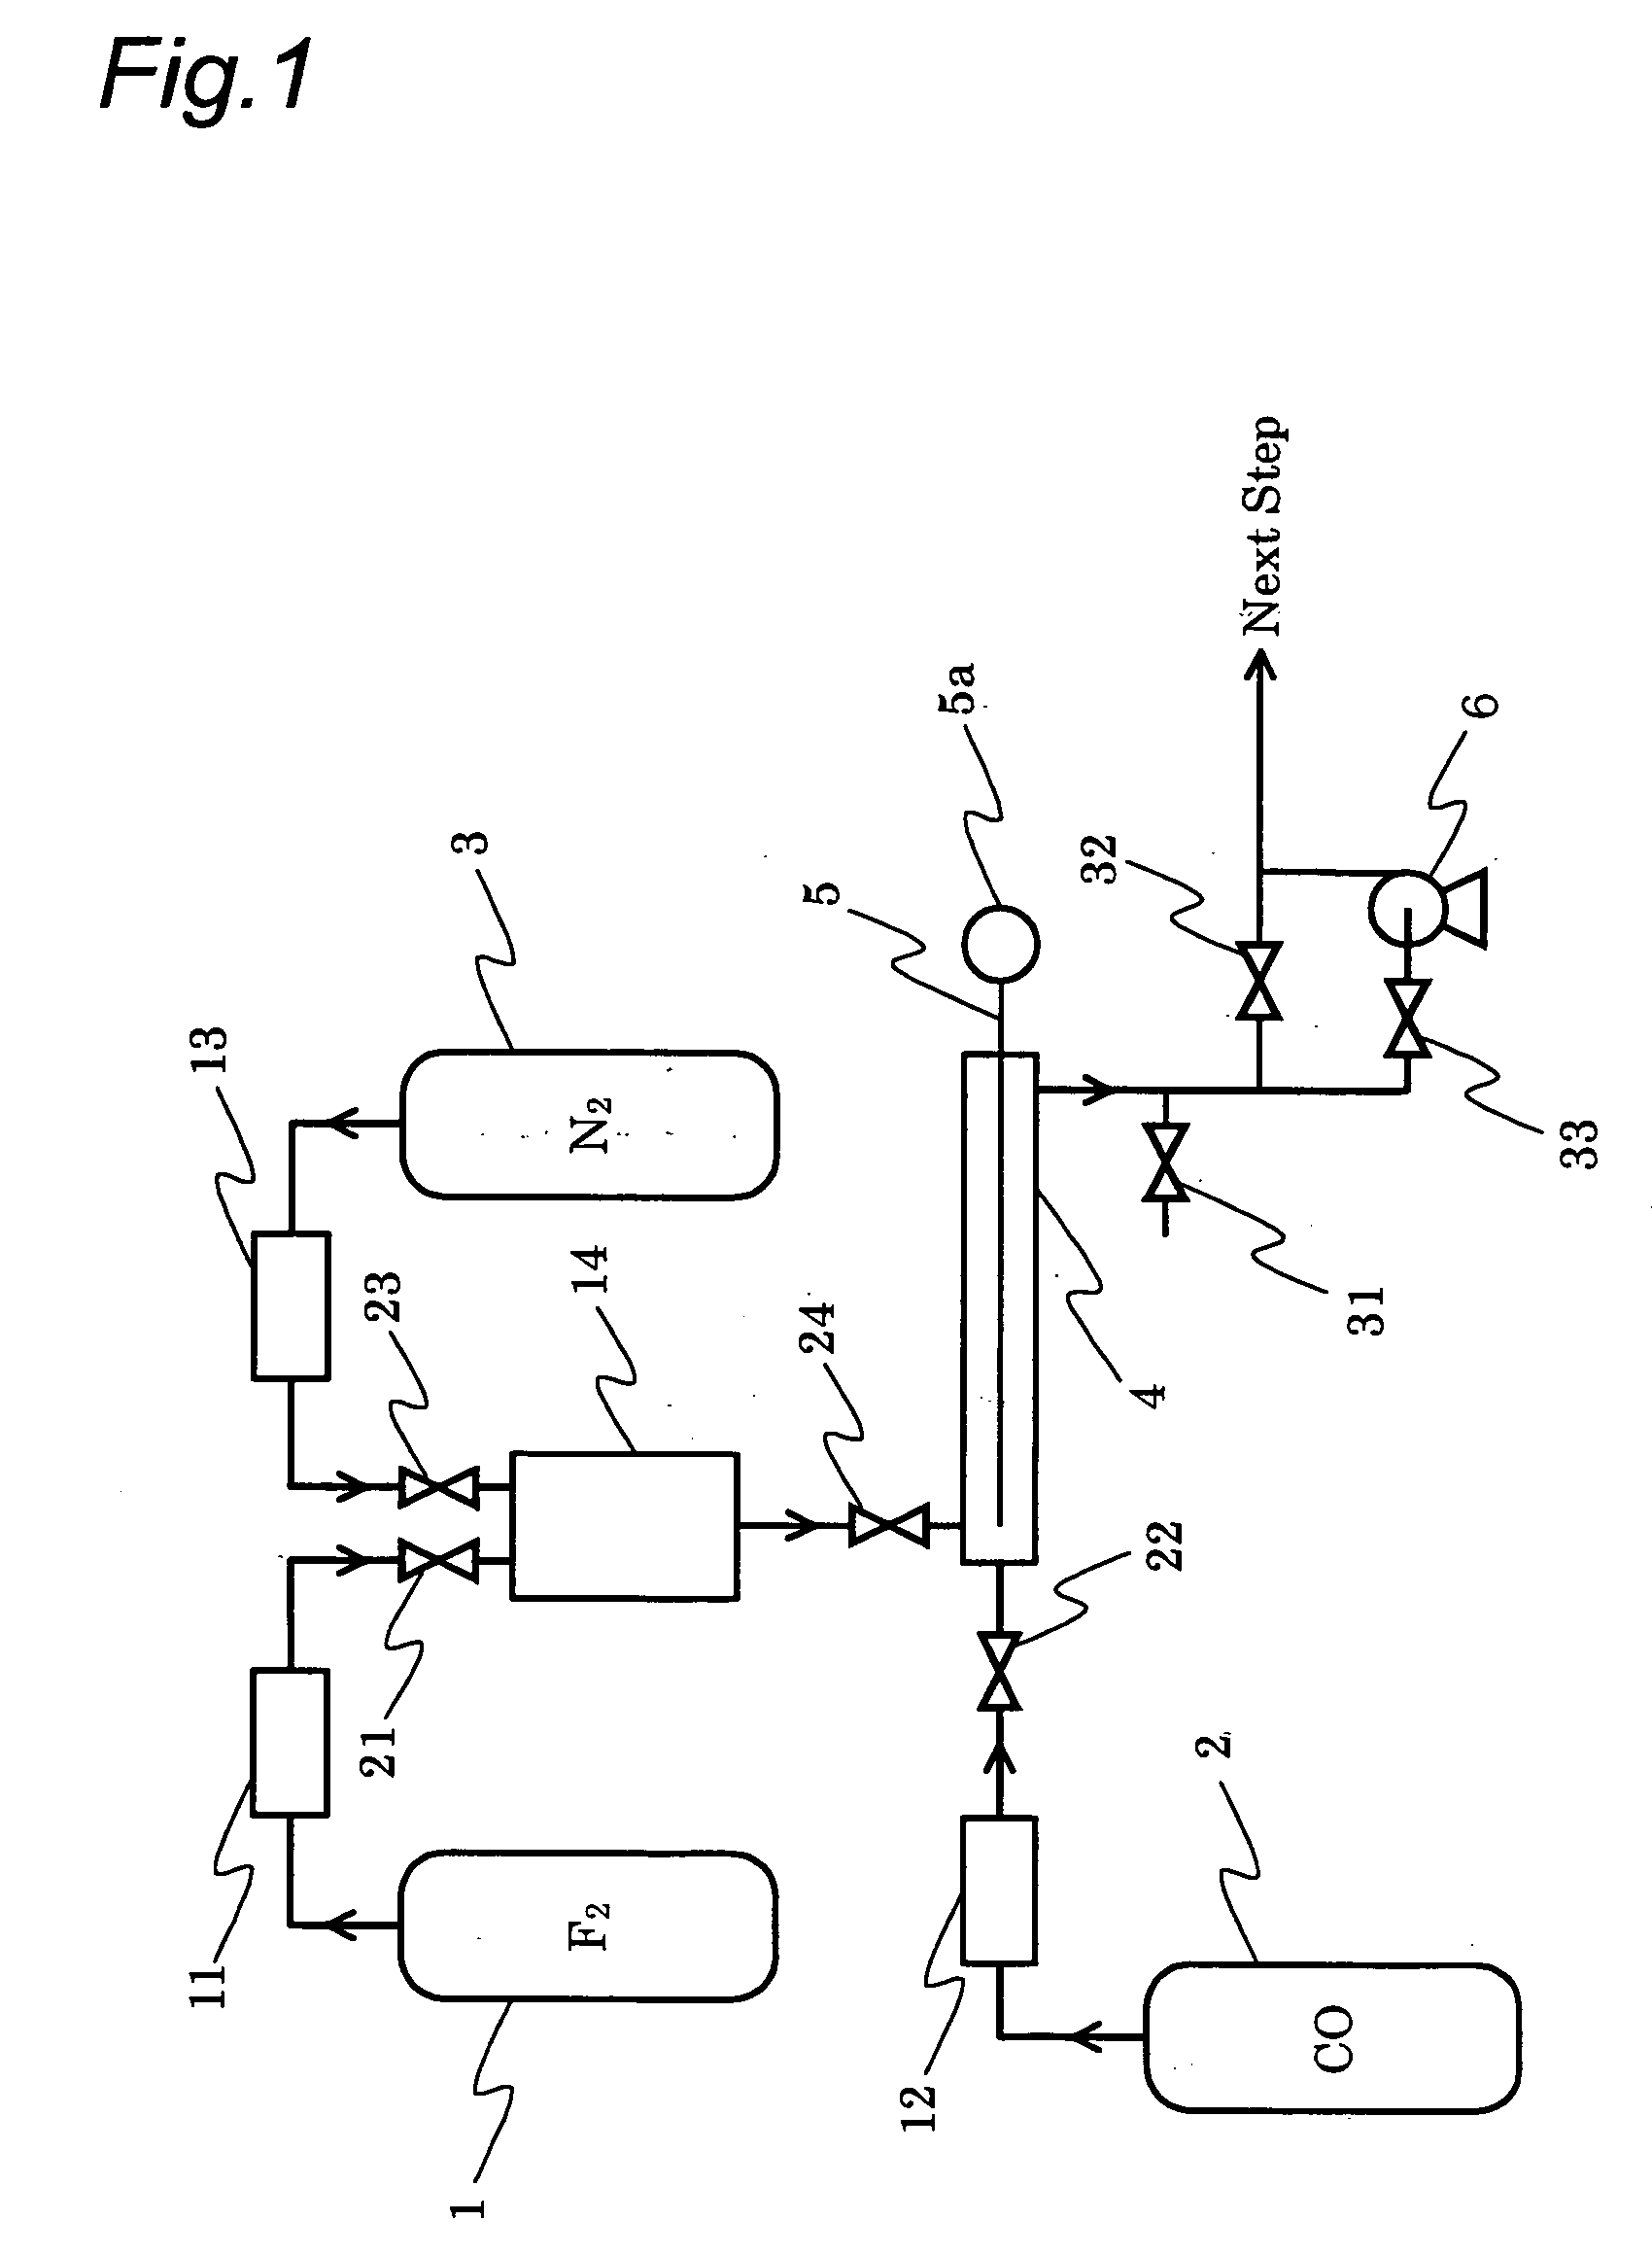 Process for producing carbonyl fluoride